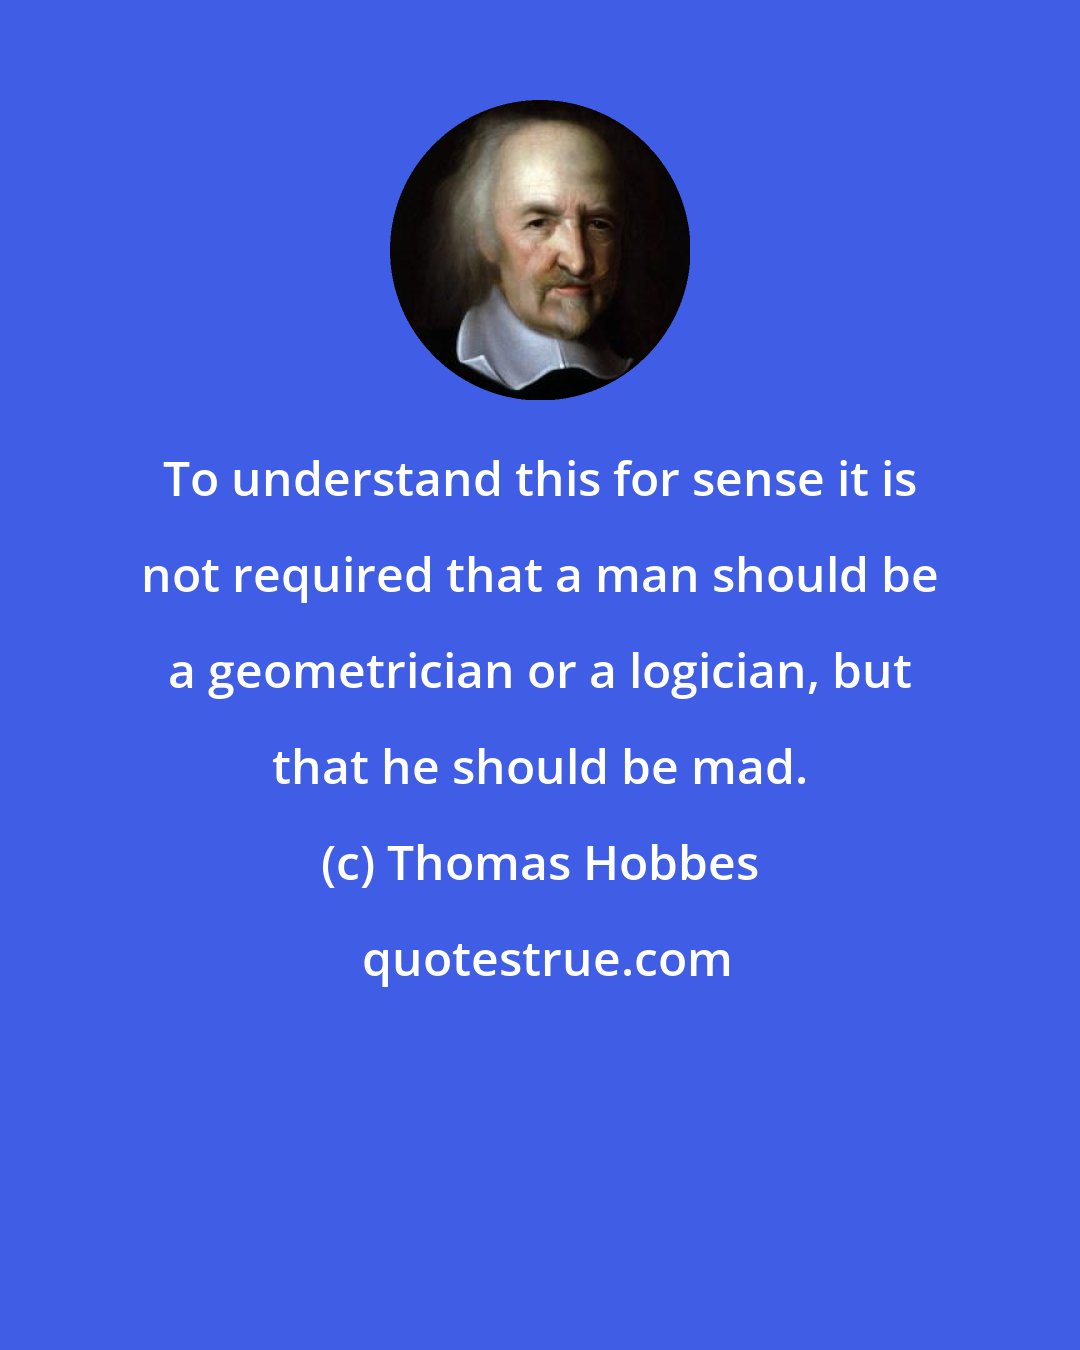 Thomas Hobbes: To understand this for sense it is not required that a man should be a geometrician or a logician, but that he should be mad.